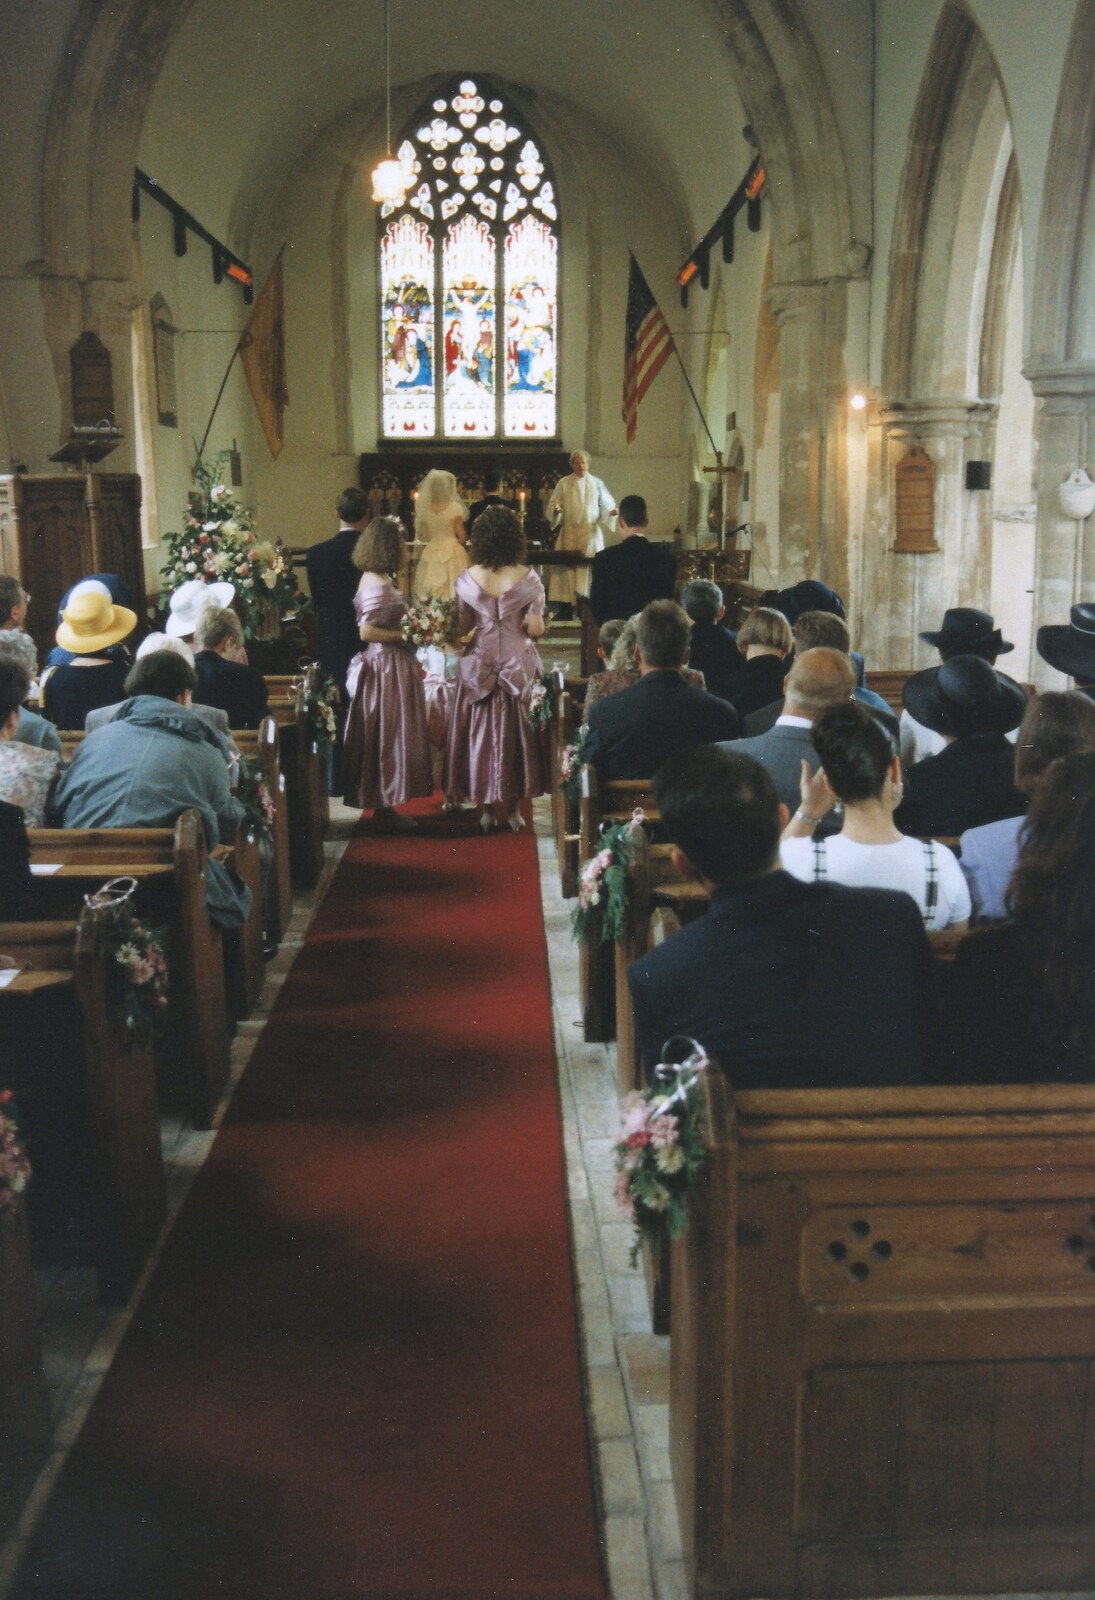 The wedding service occurs from Debbie's Wedding, Suffolk - 12th June 1999